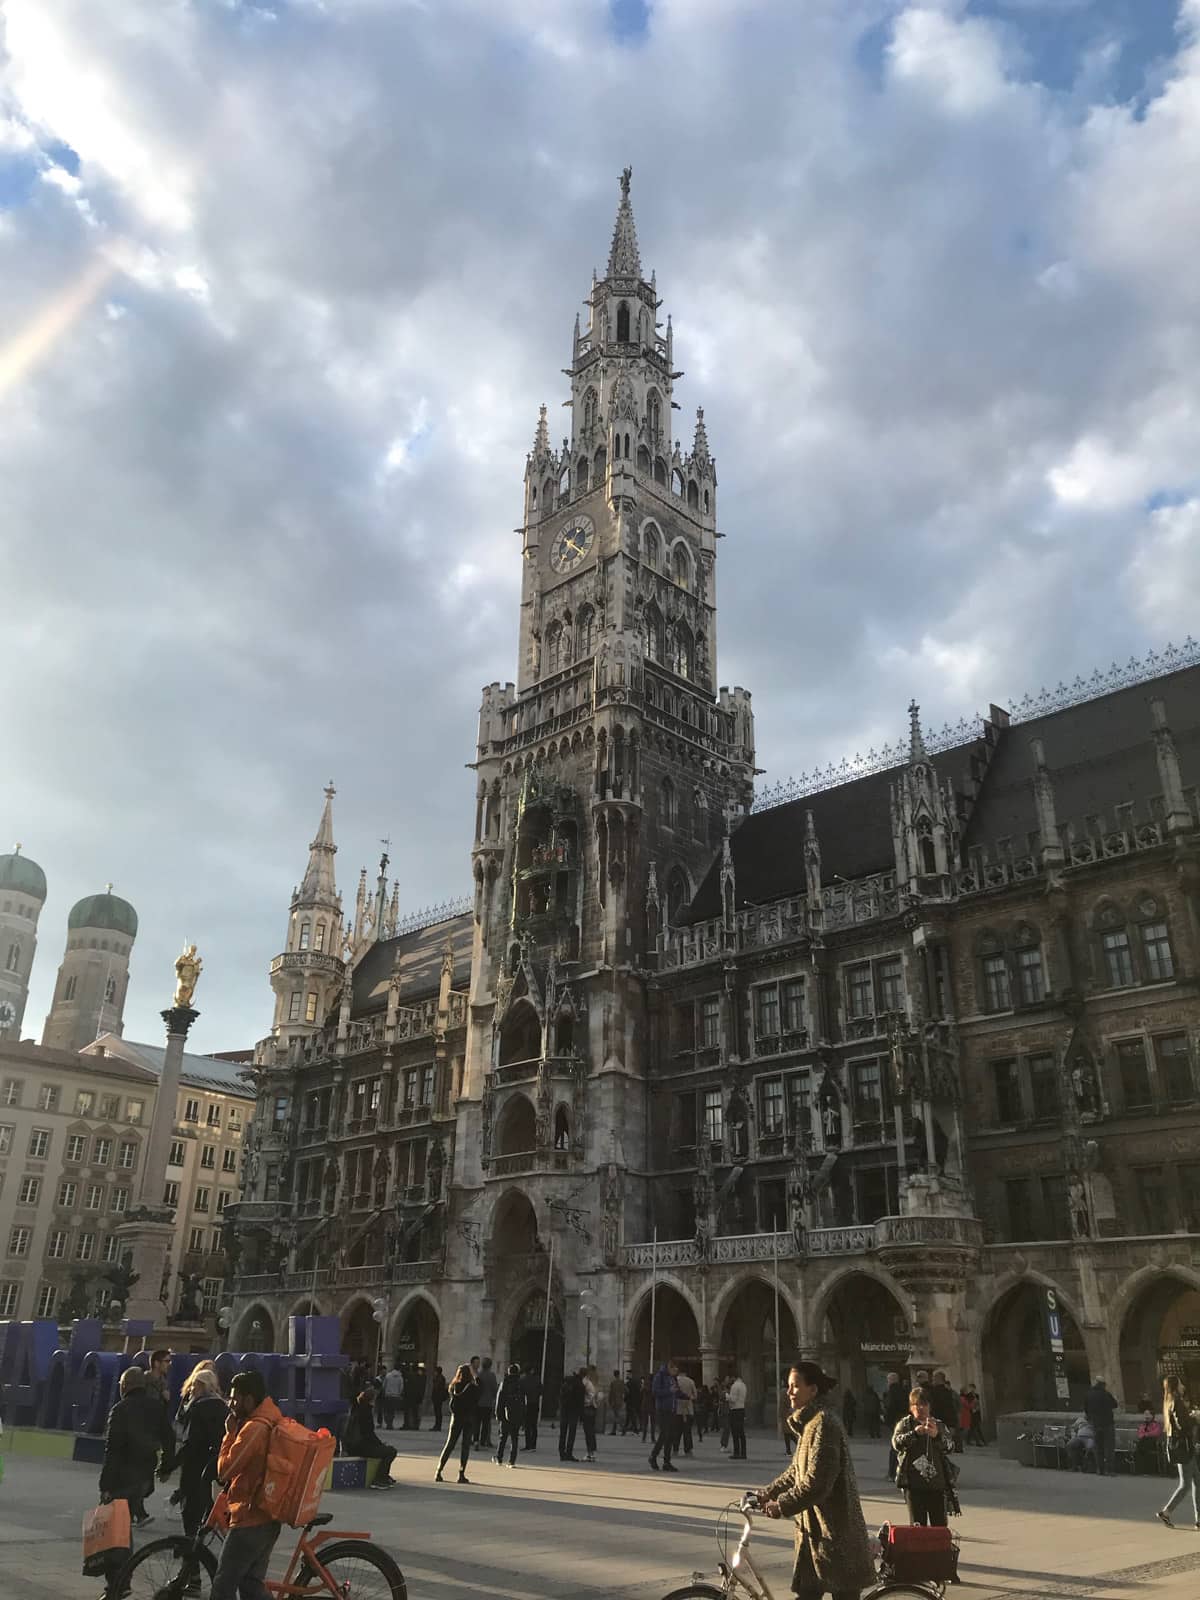 An old tower in downtown Munich, characterised by its old architecture. In the foreground are people taking photos and riding bicycles